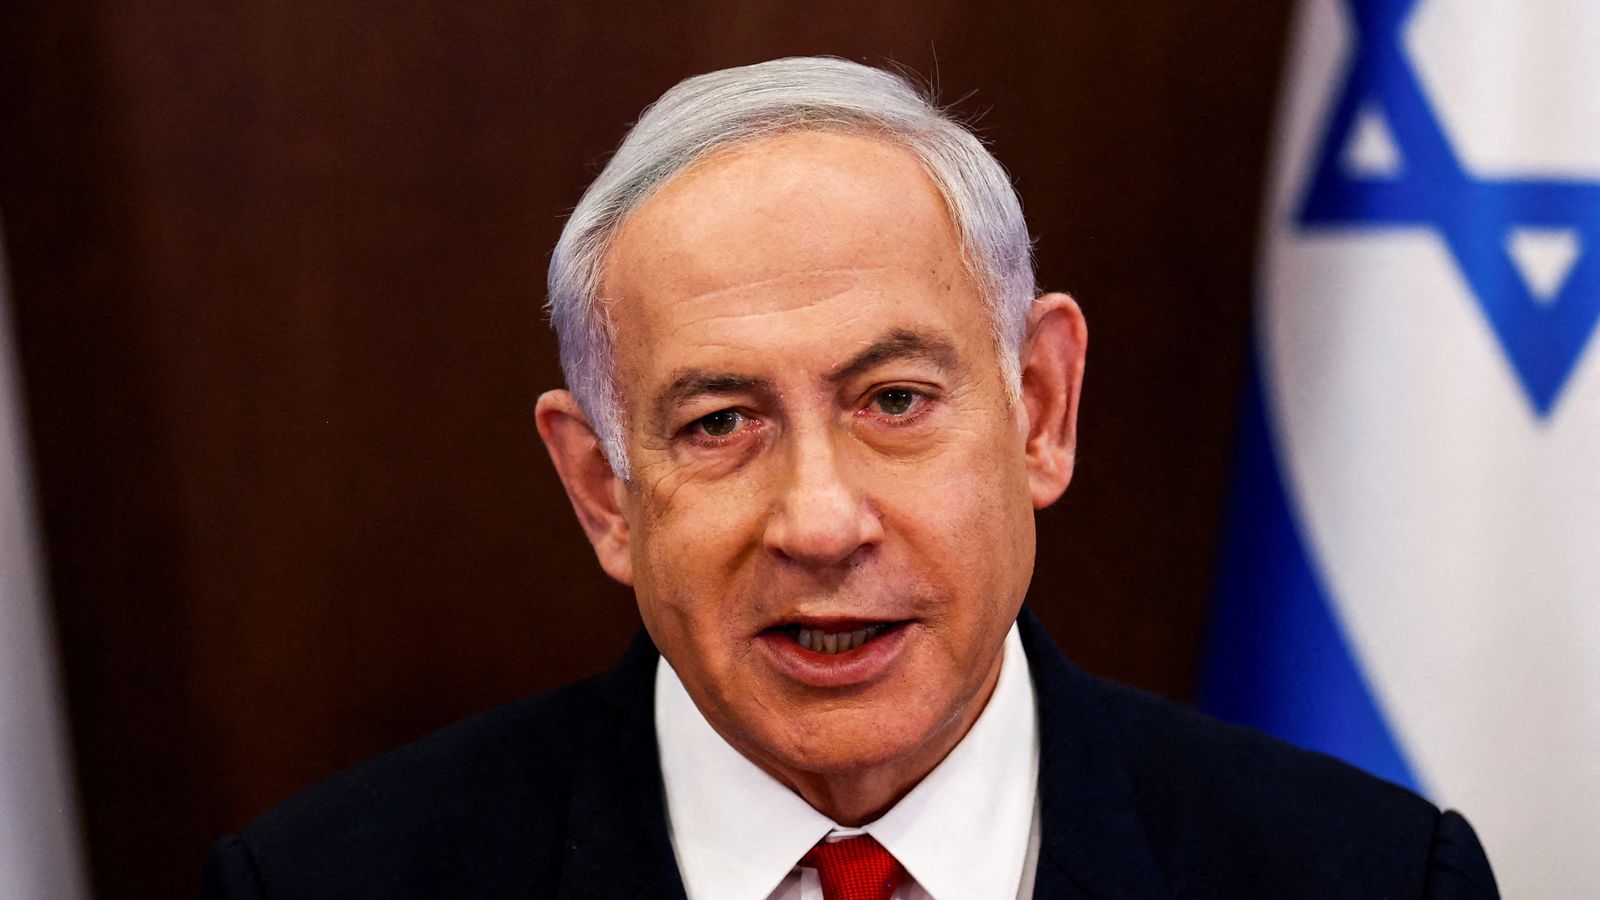 Israel will do 'whatever we need to do to defend ourselves' against Iran, Netanyahu says